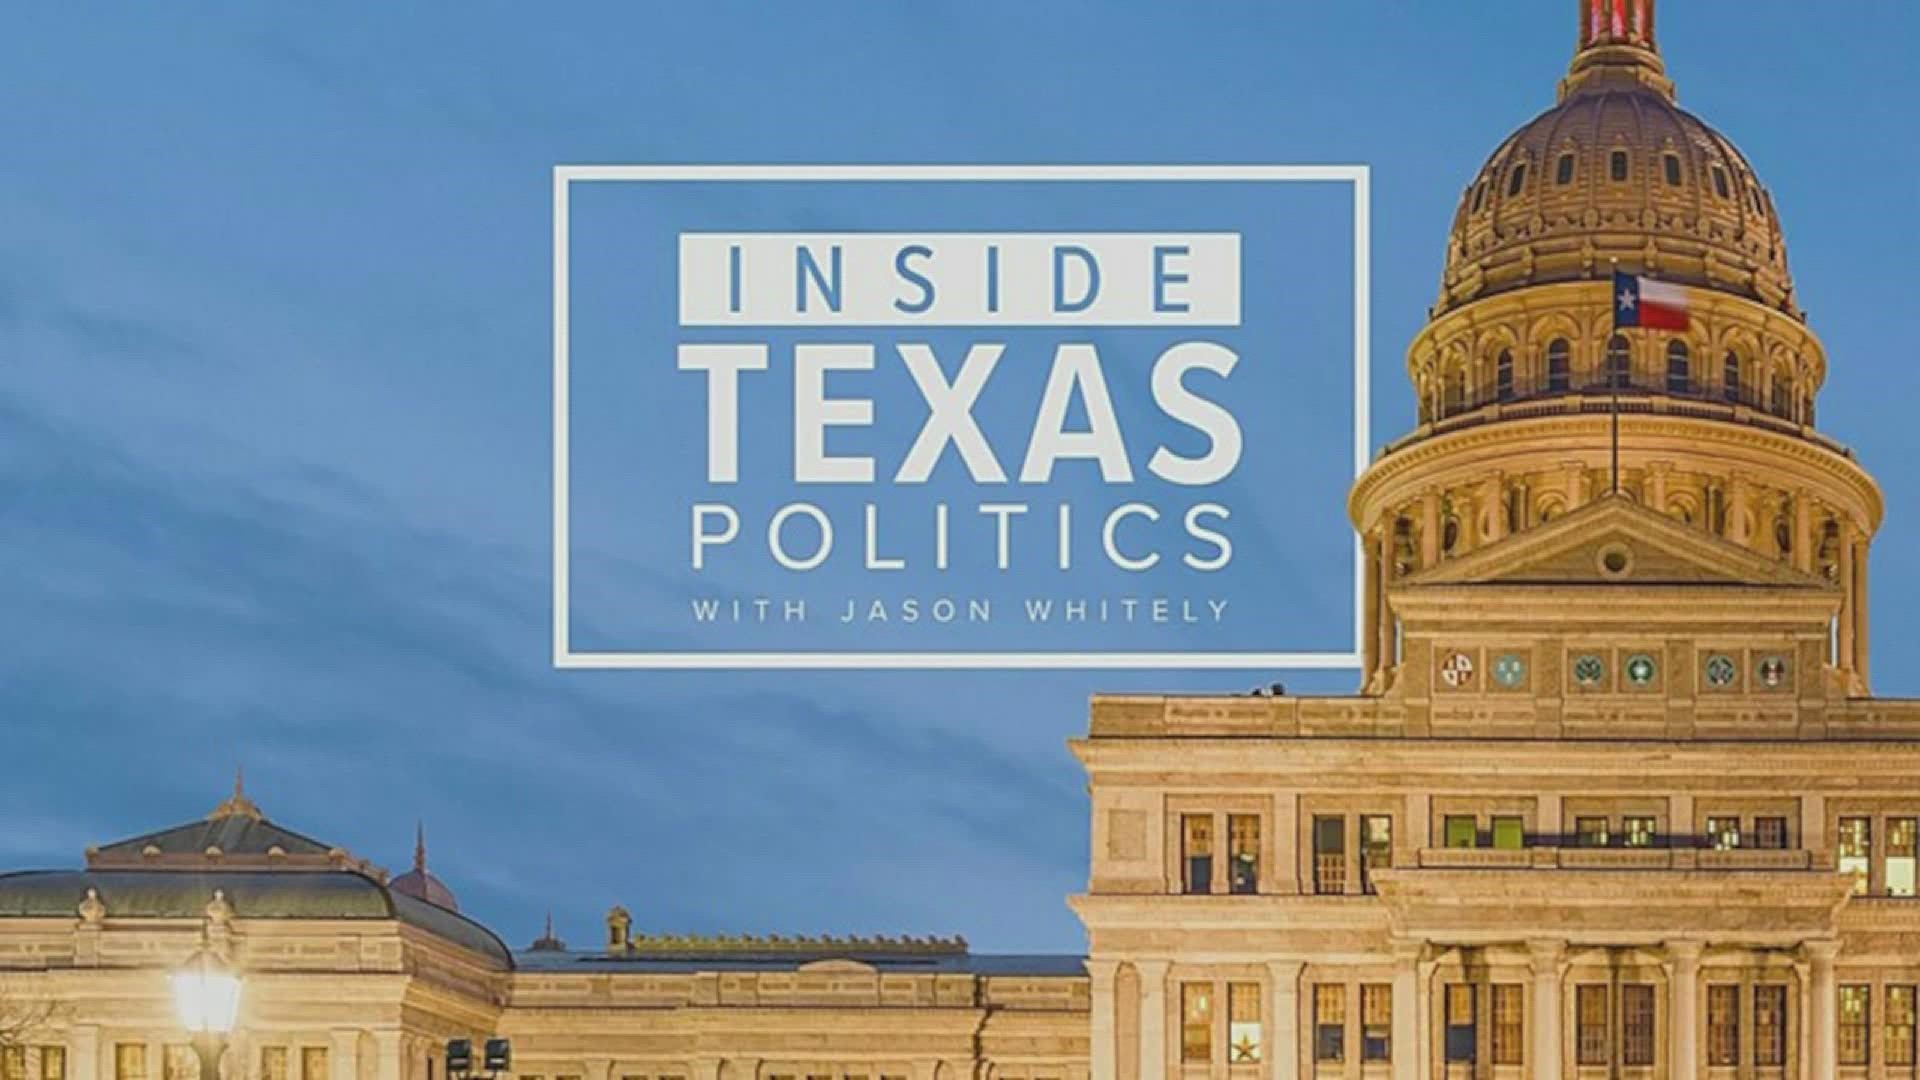 Plus: A North Texas Congressman stumps for raising the debt ceiling, and an East Texas Republican says support is growing for legislation targeting transgender Texan